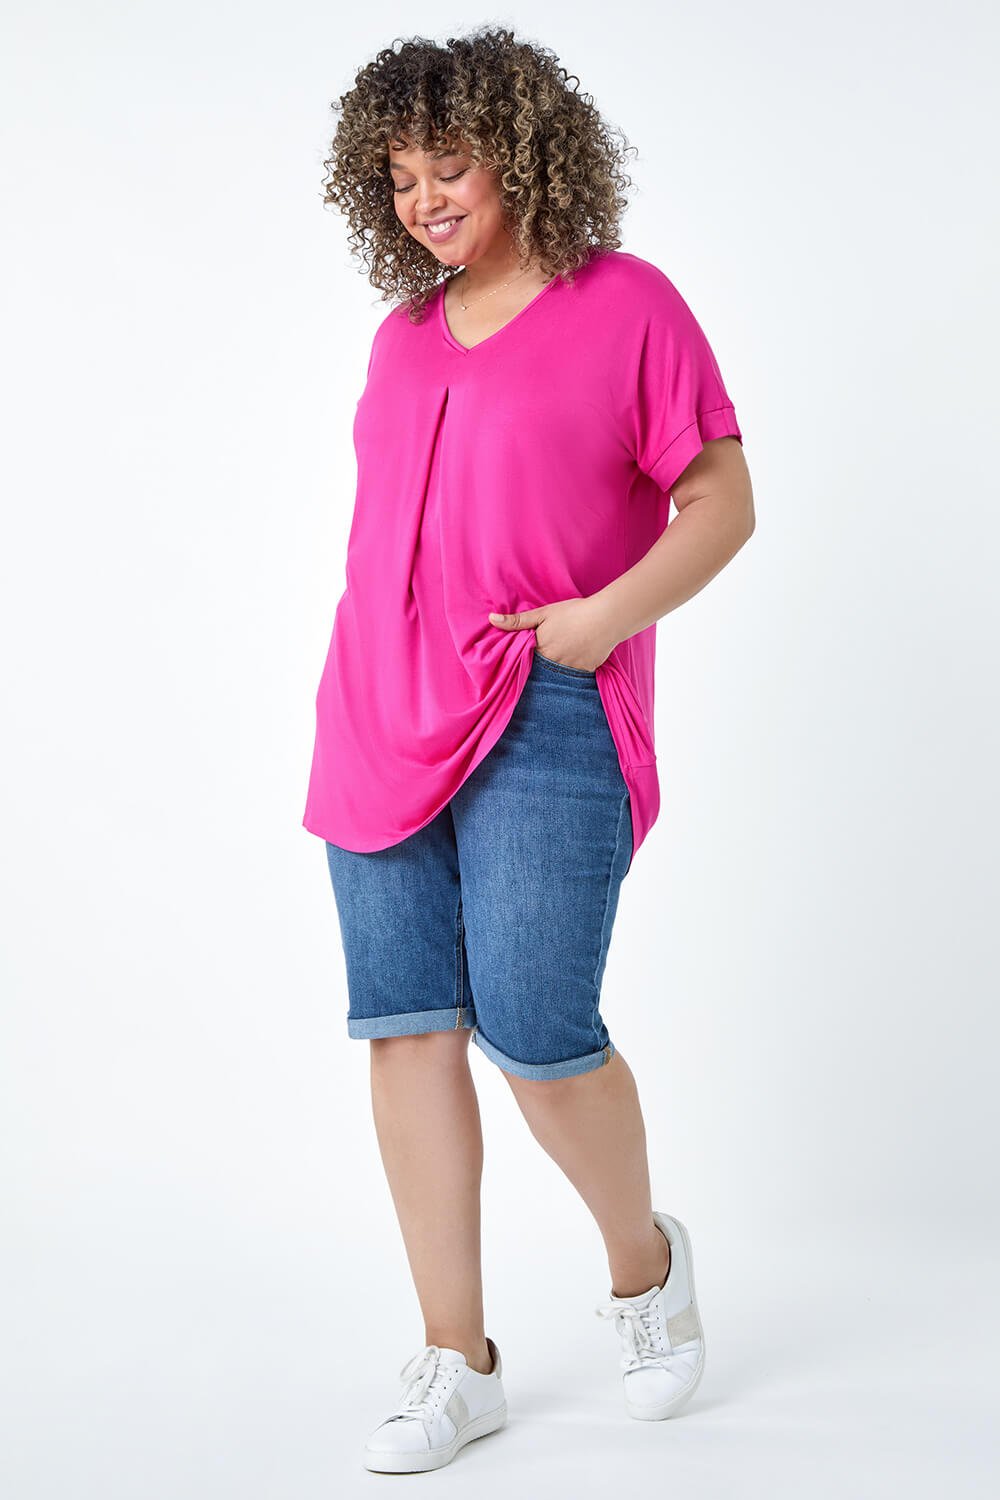 PINK Curve Plain Pleat Front Stretch Top, Image 2 of 5